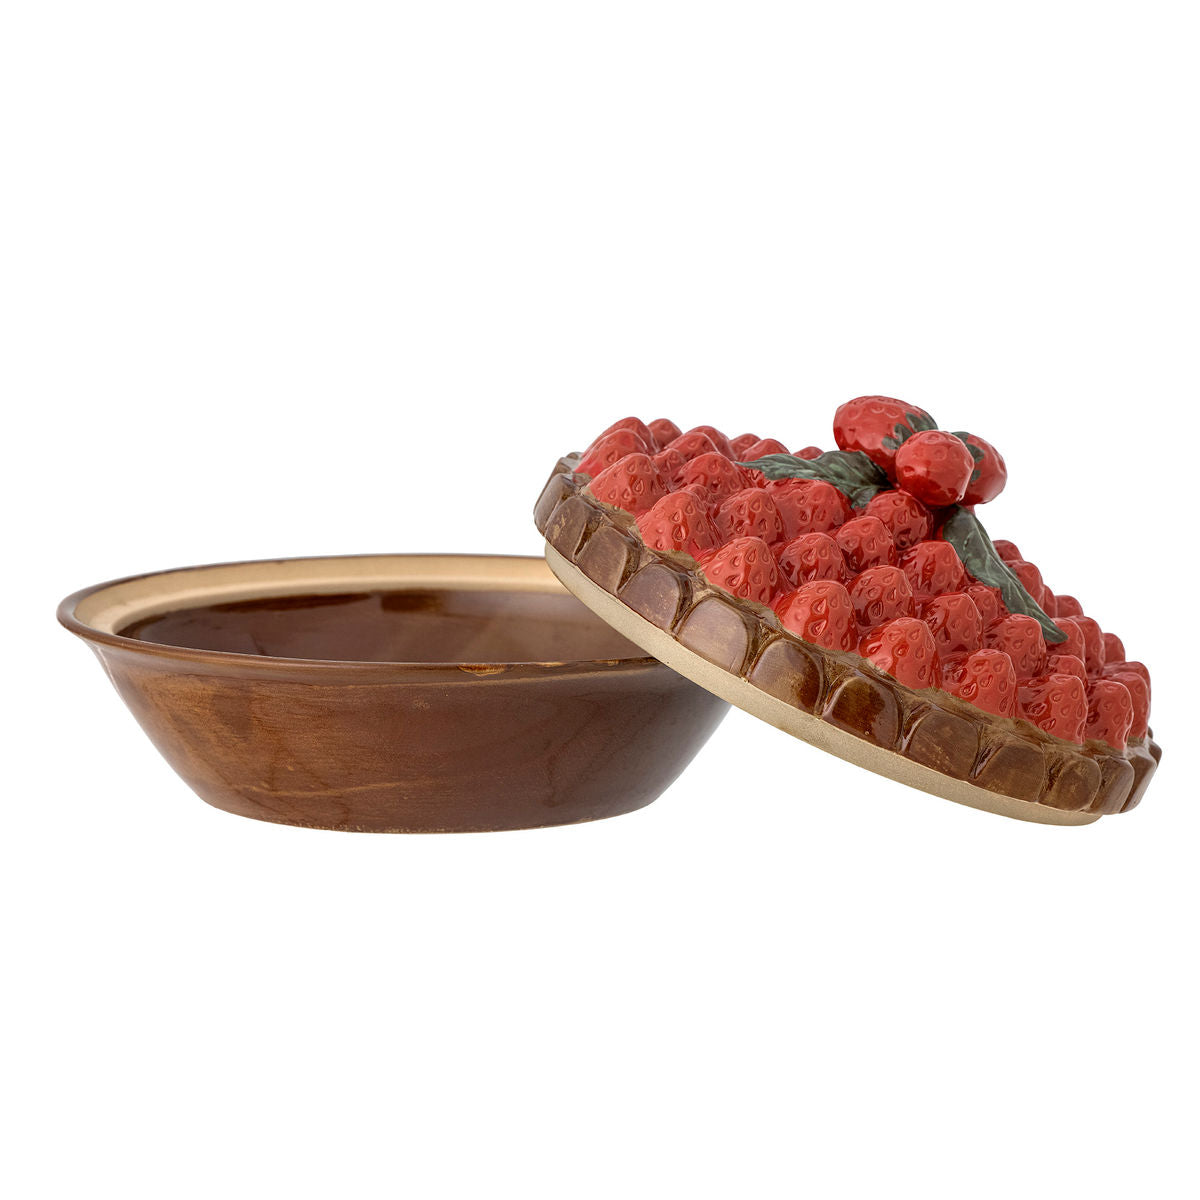 Creative Collection Maehan ovenproof dish with lid, brown, stoneware